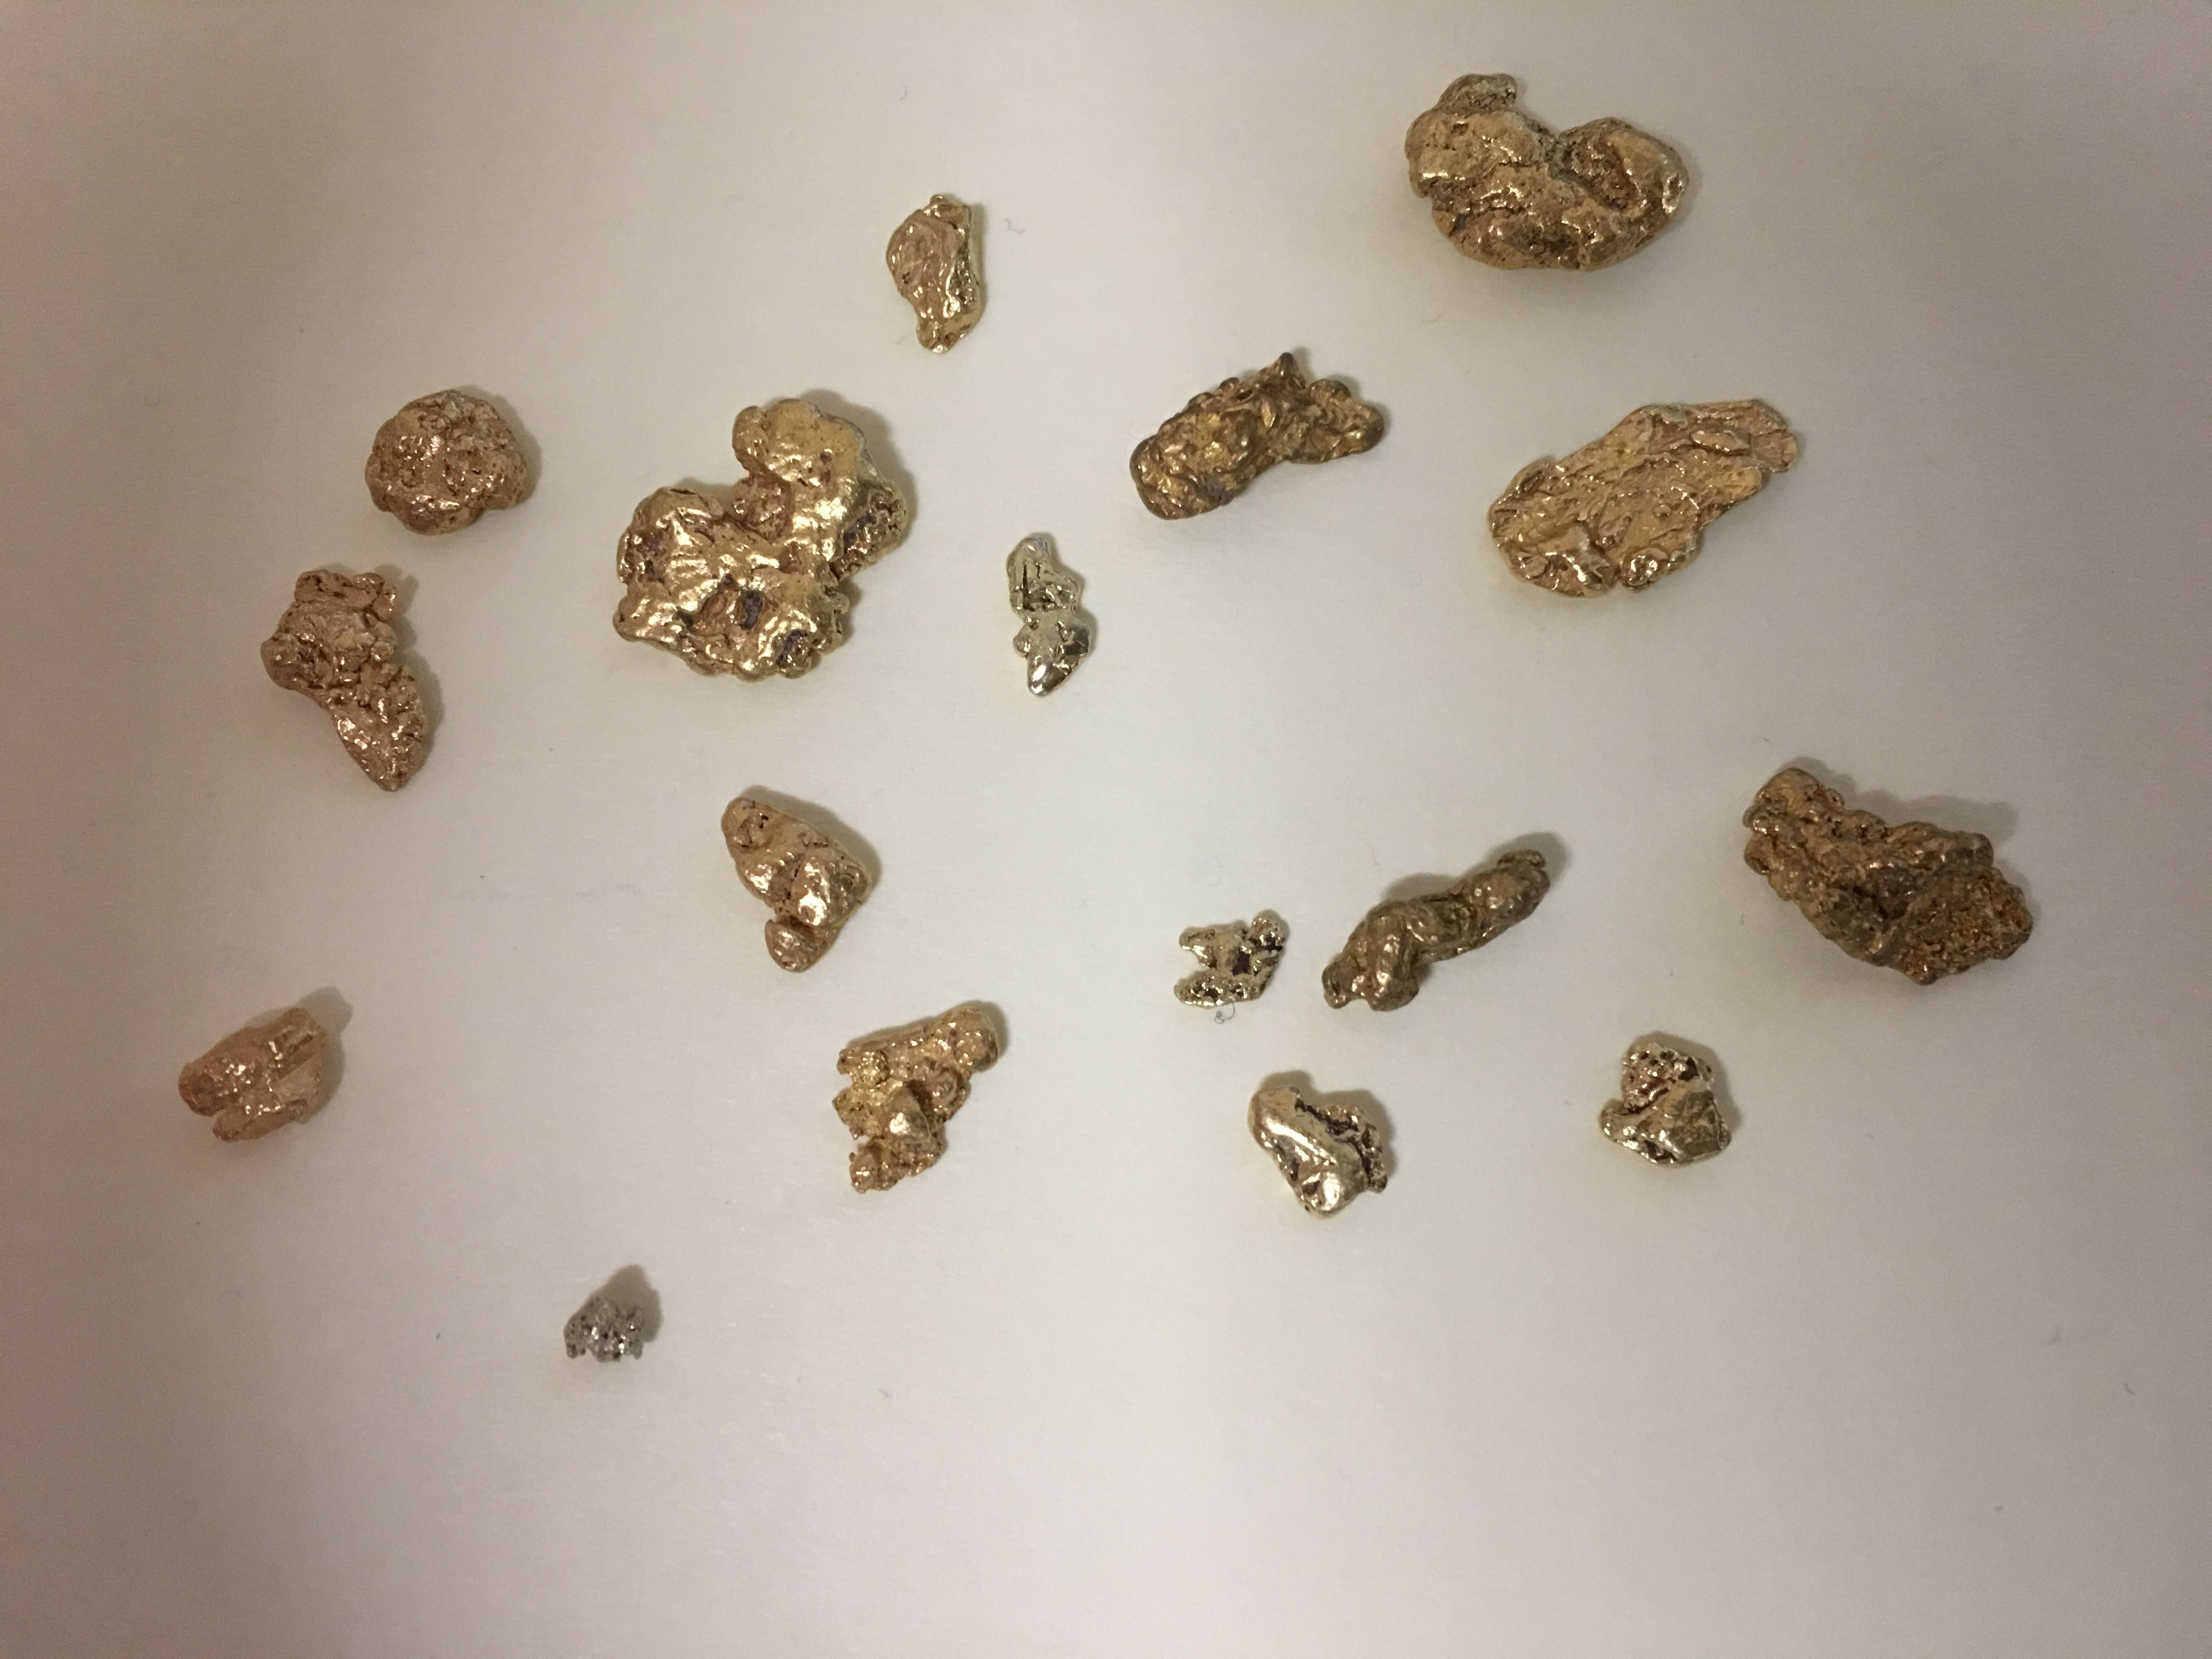 My Gold Nuggets.
Most from Oregon/Cali and some from Alaska.